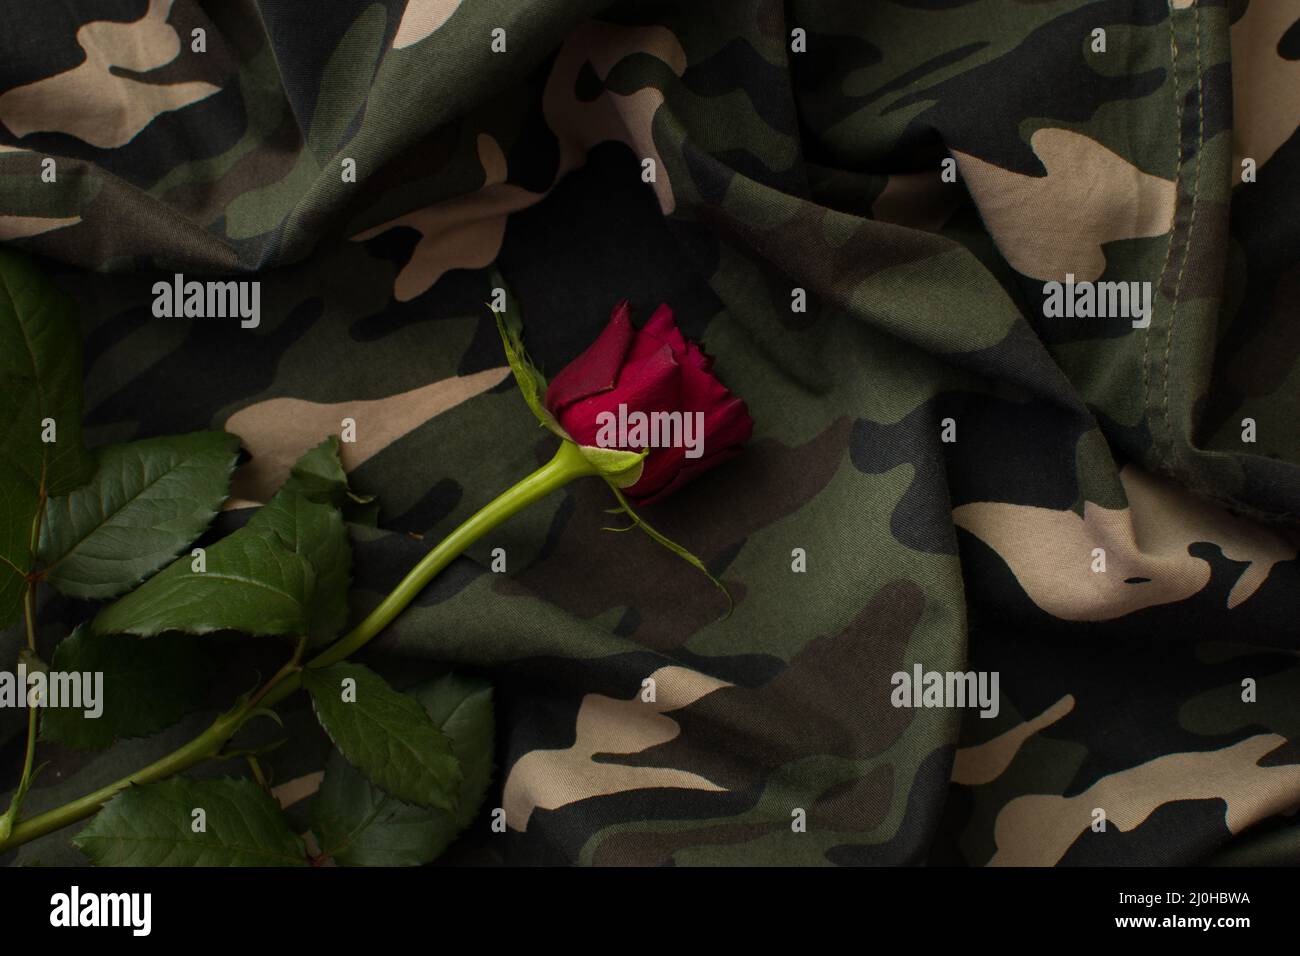 Red rose on military camouflage uniform background Stock Photo